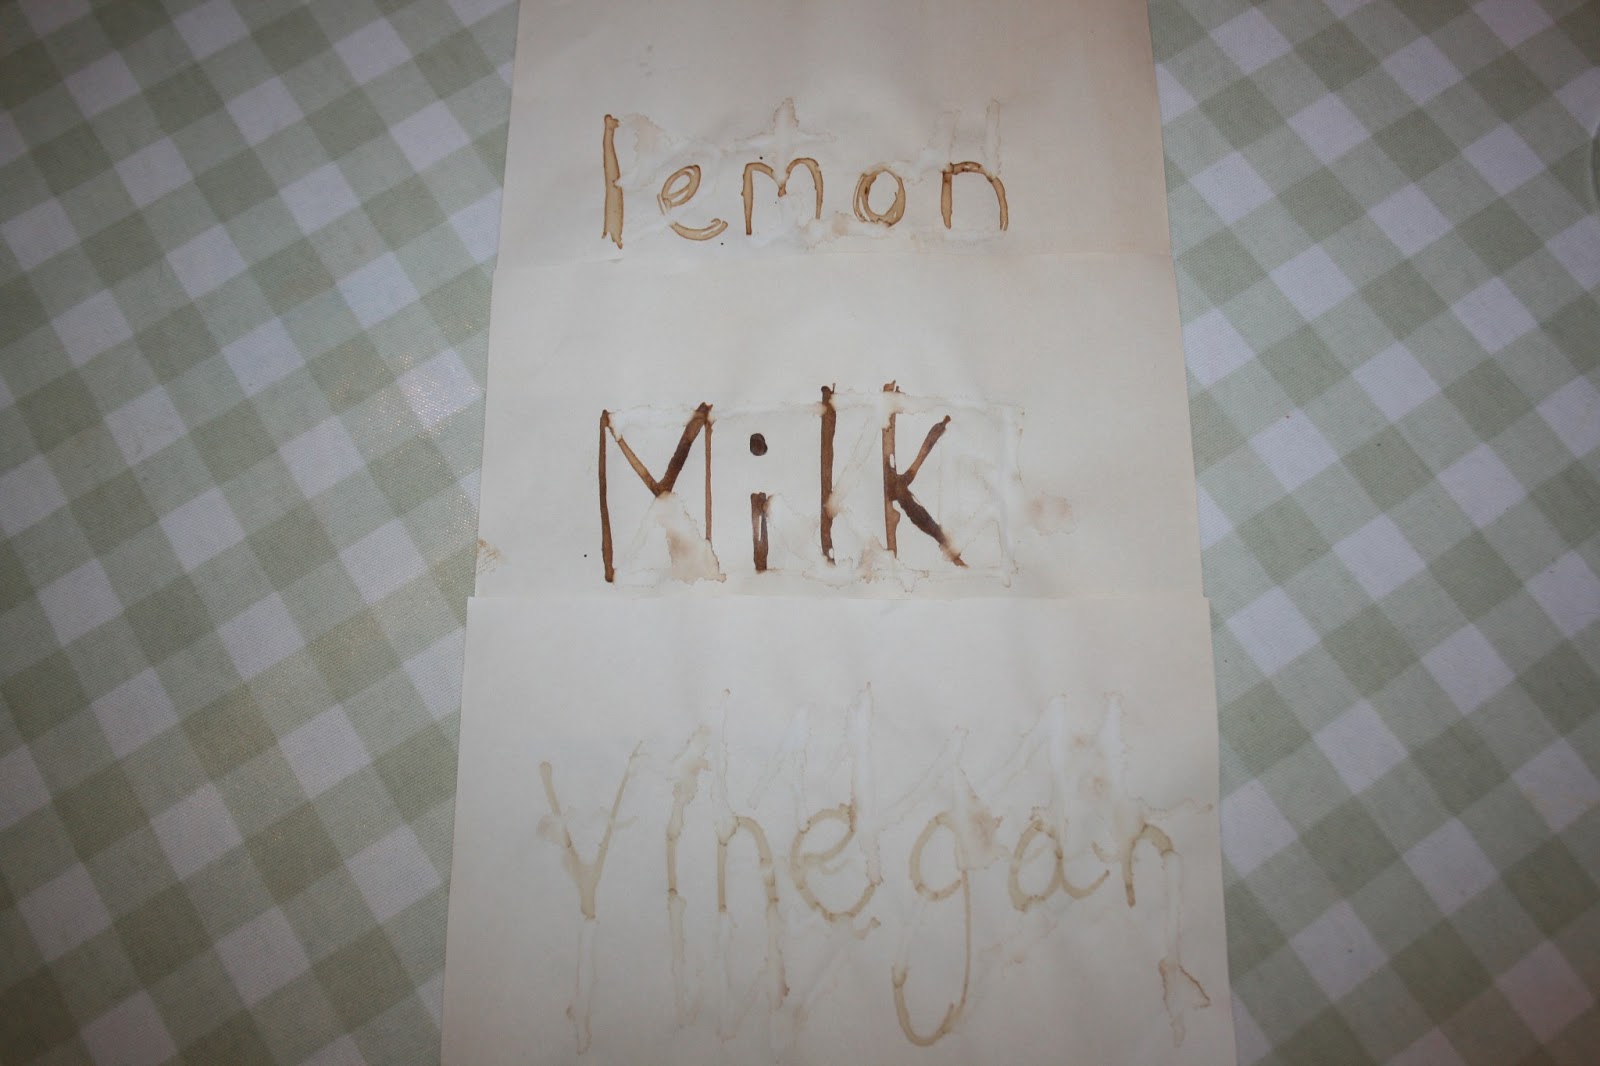 How to write invisible ink with lemon juice